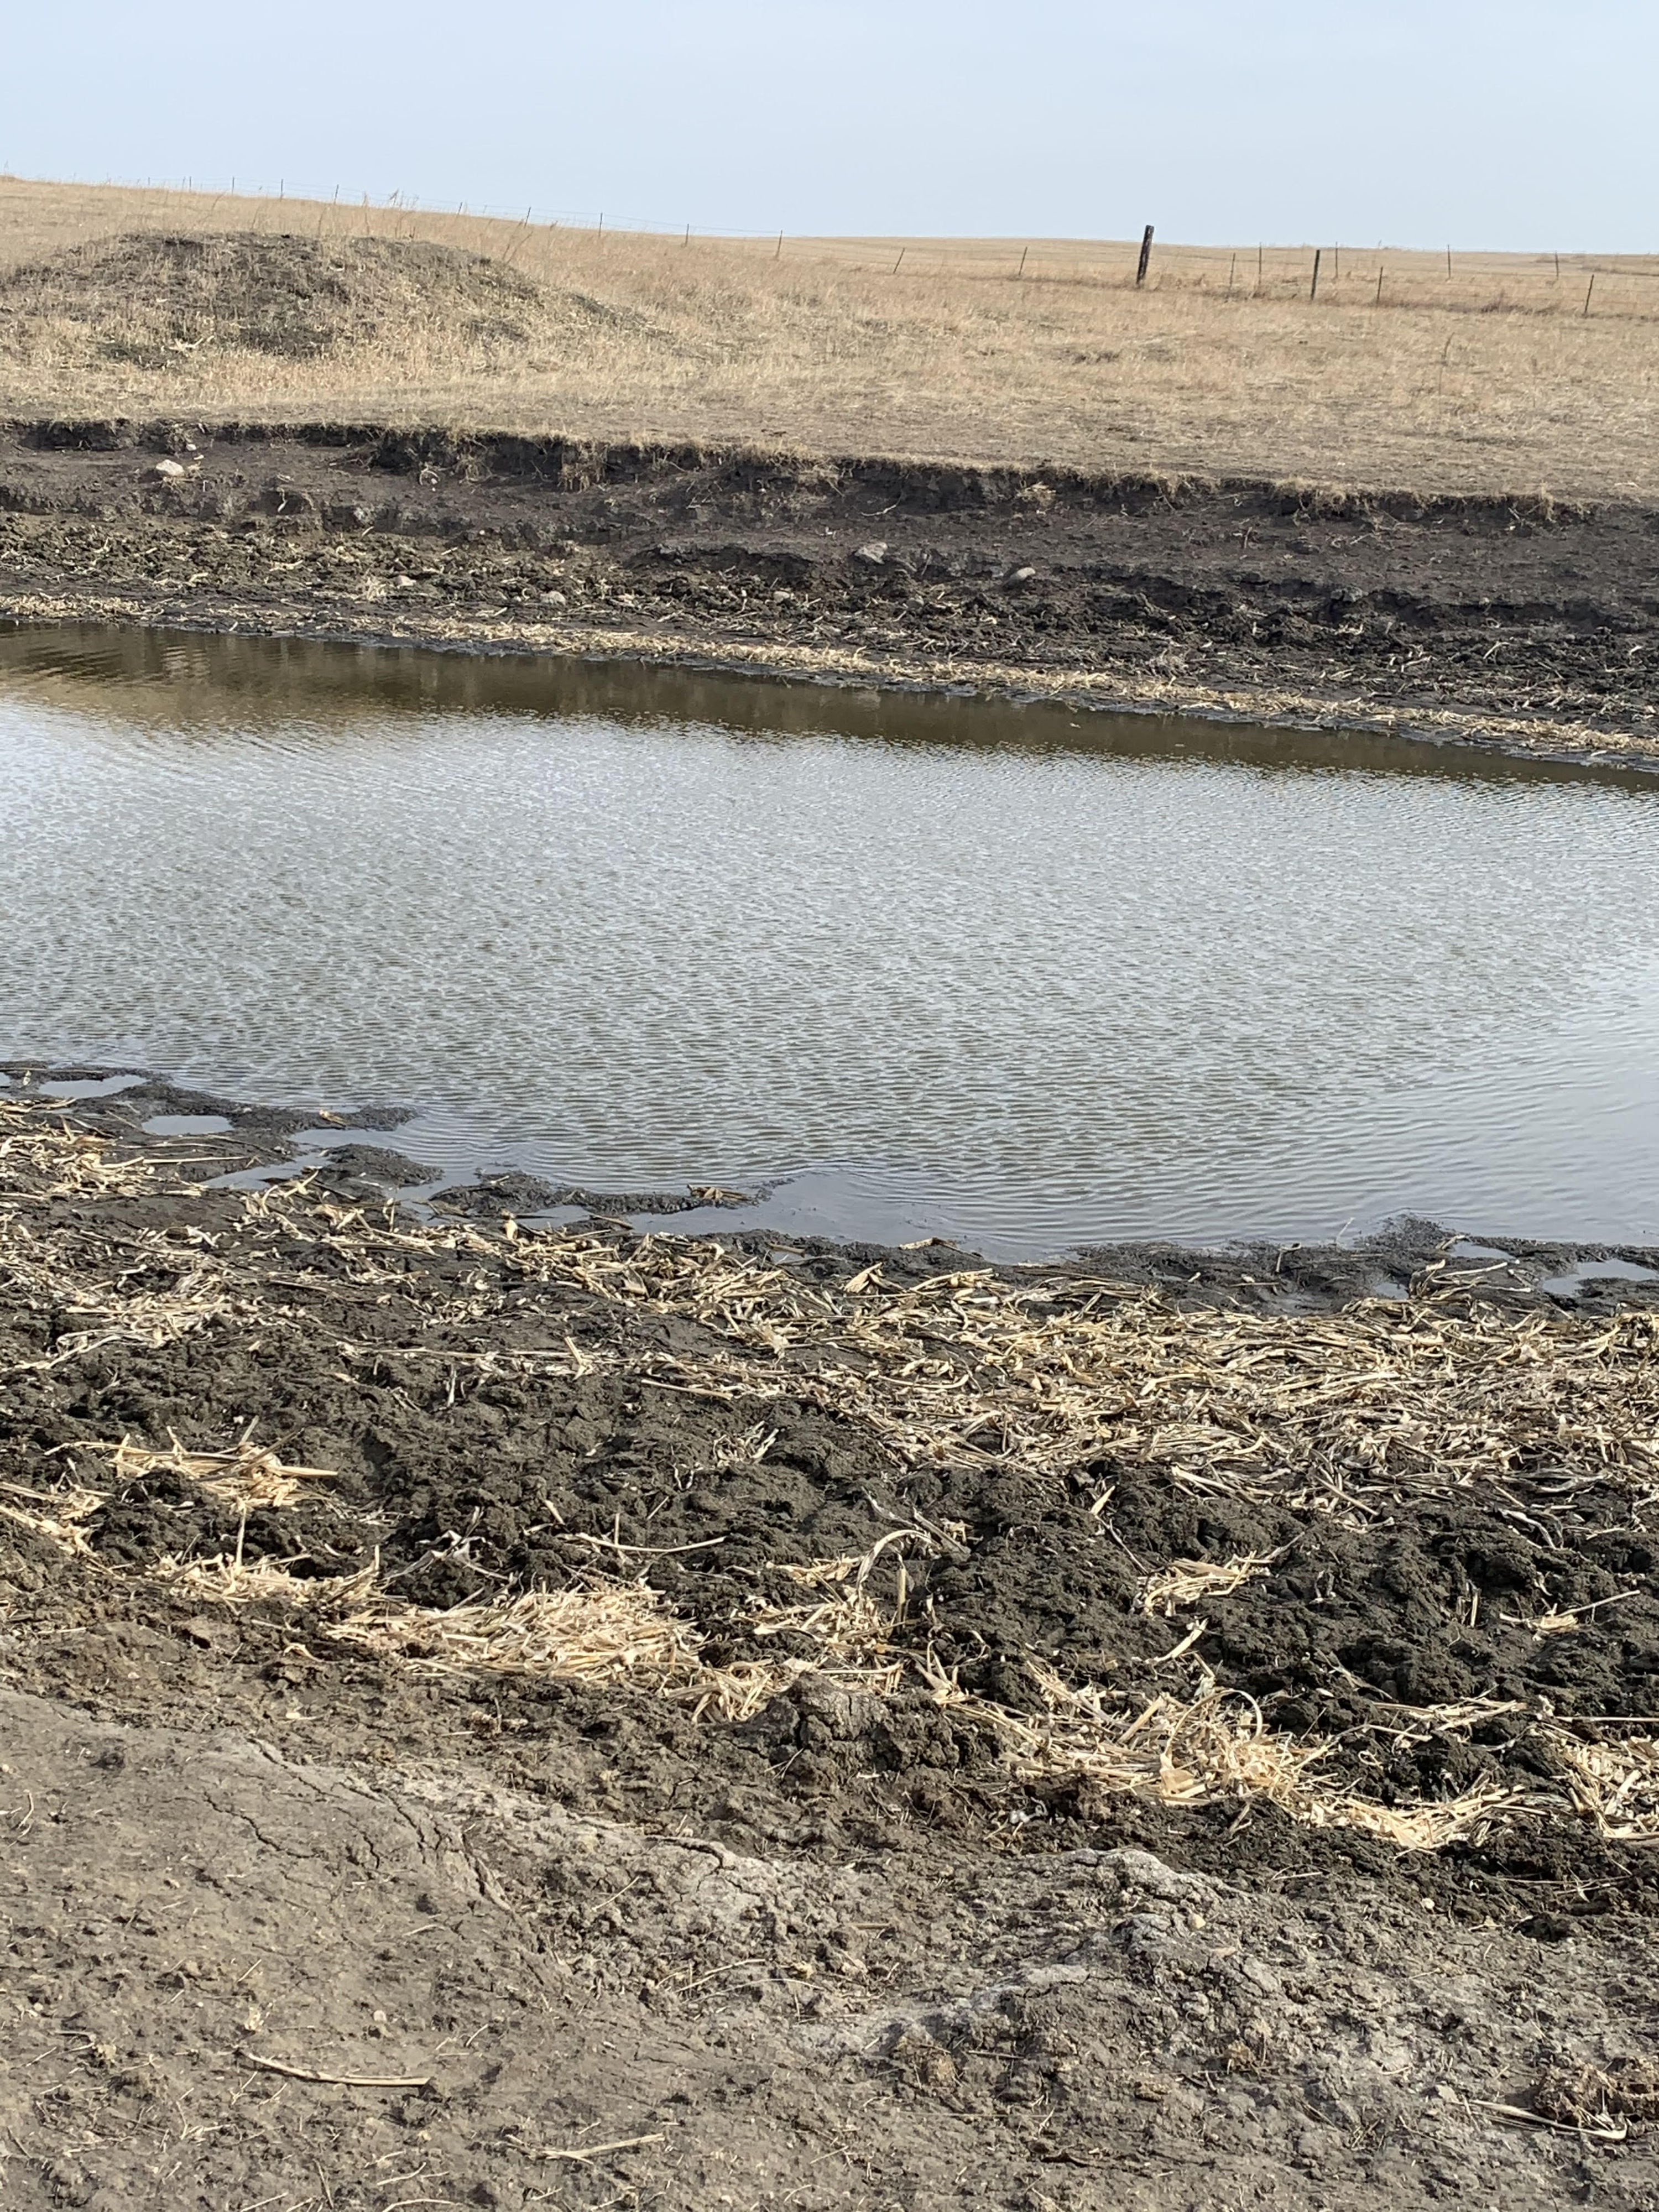 Morning Ag News, August 19, 2021: USDA meteorologist says drought began last year